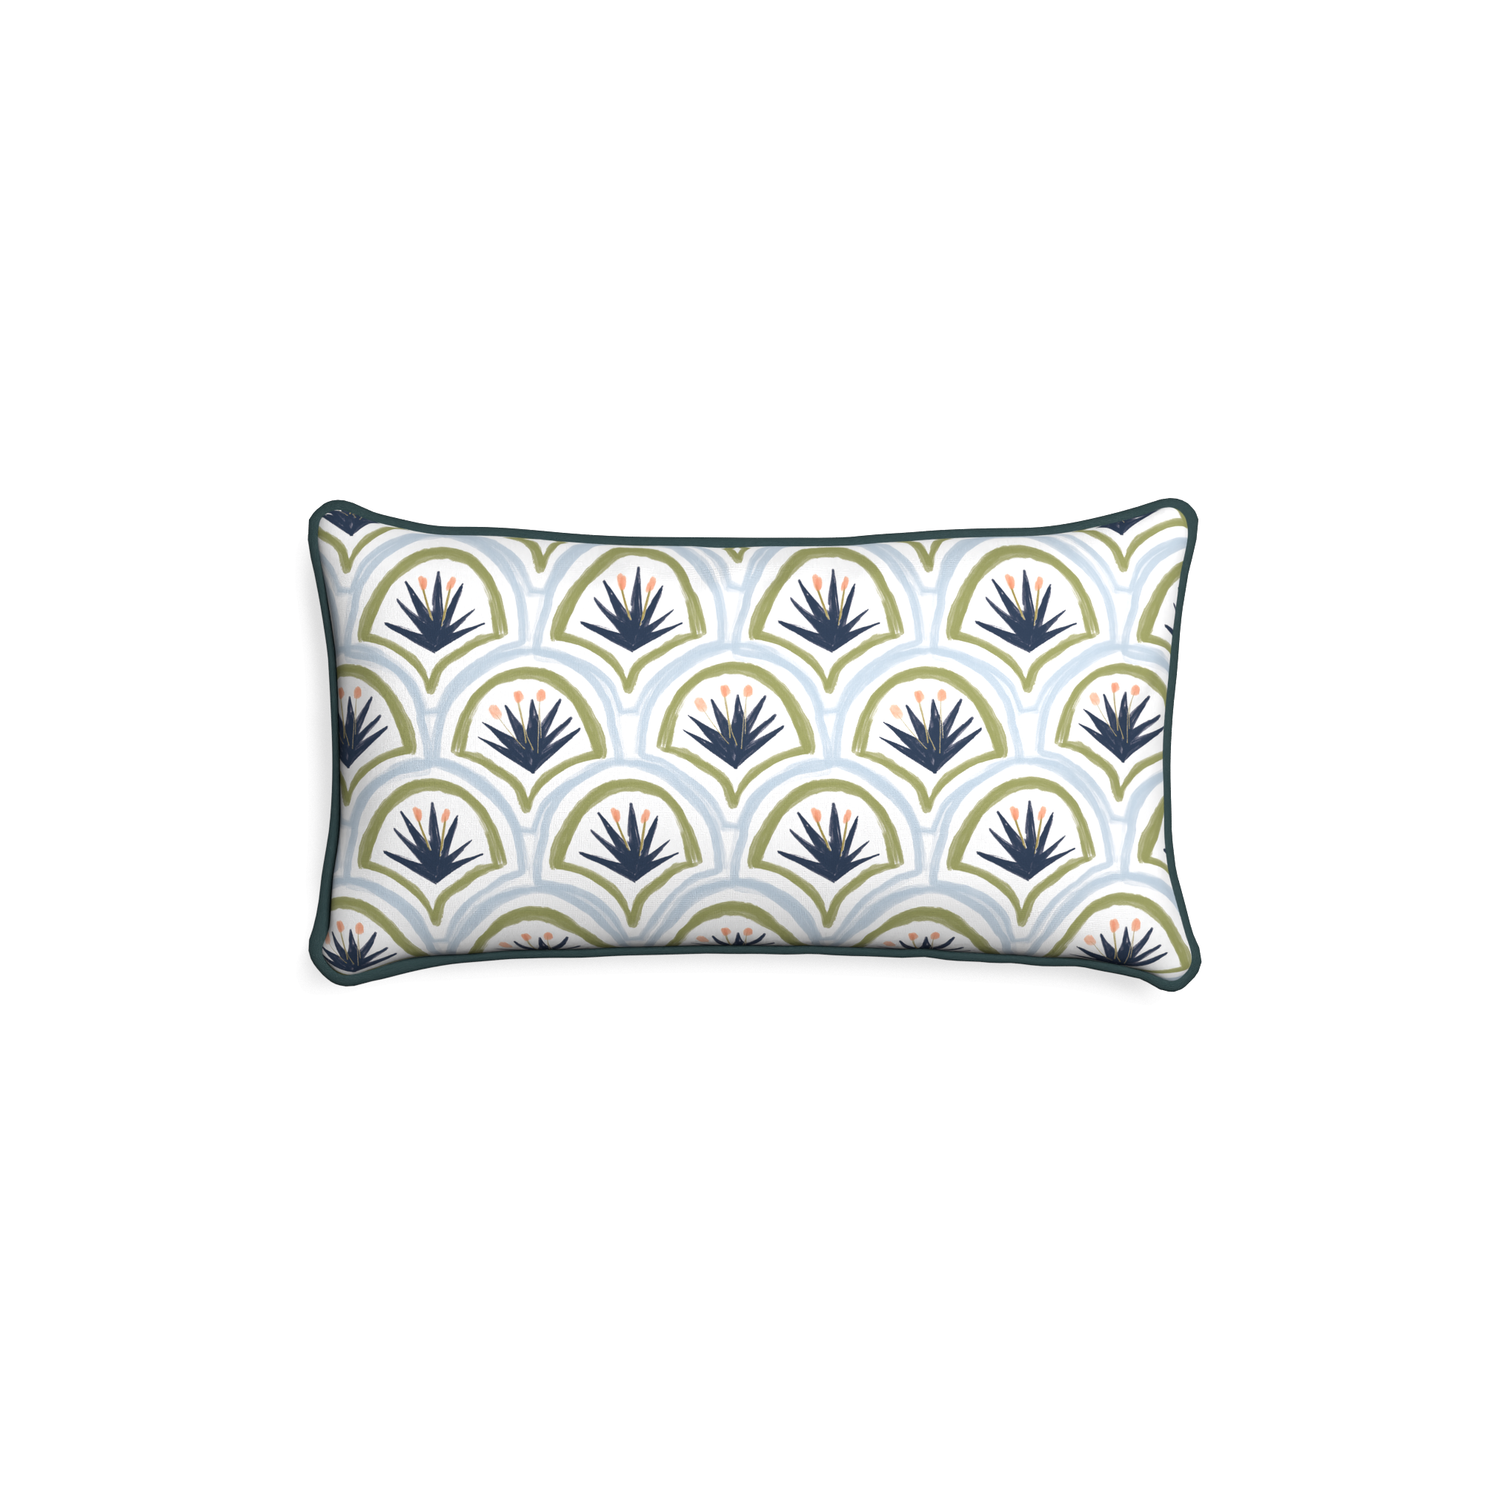 Petite-lumbar thatcher midnight custom art deco palm patternpillow with p piping on white background